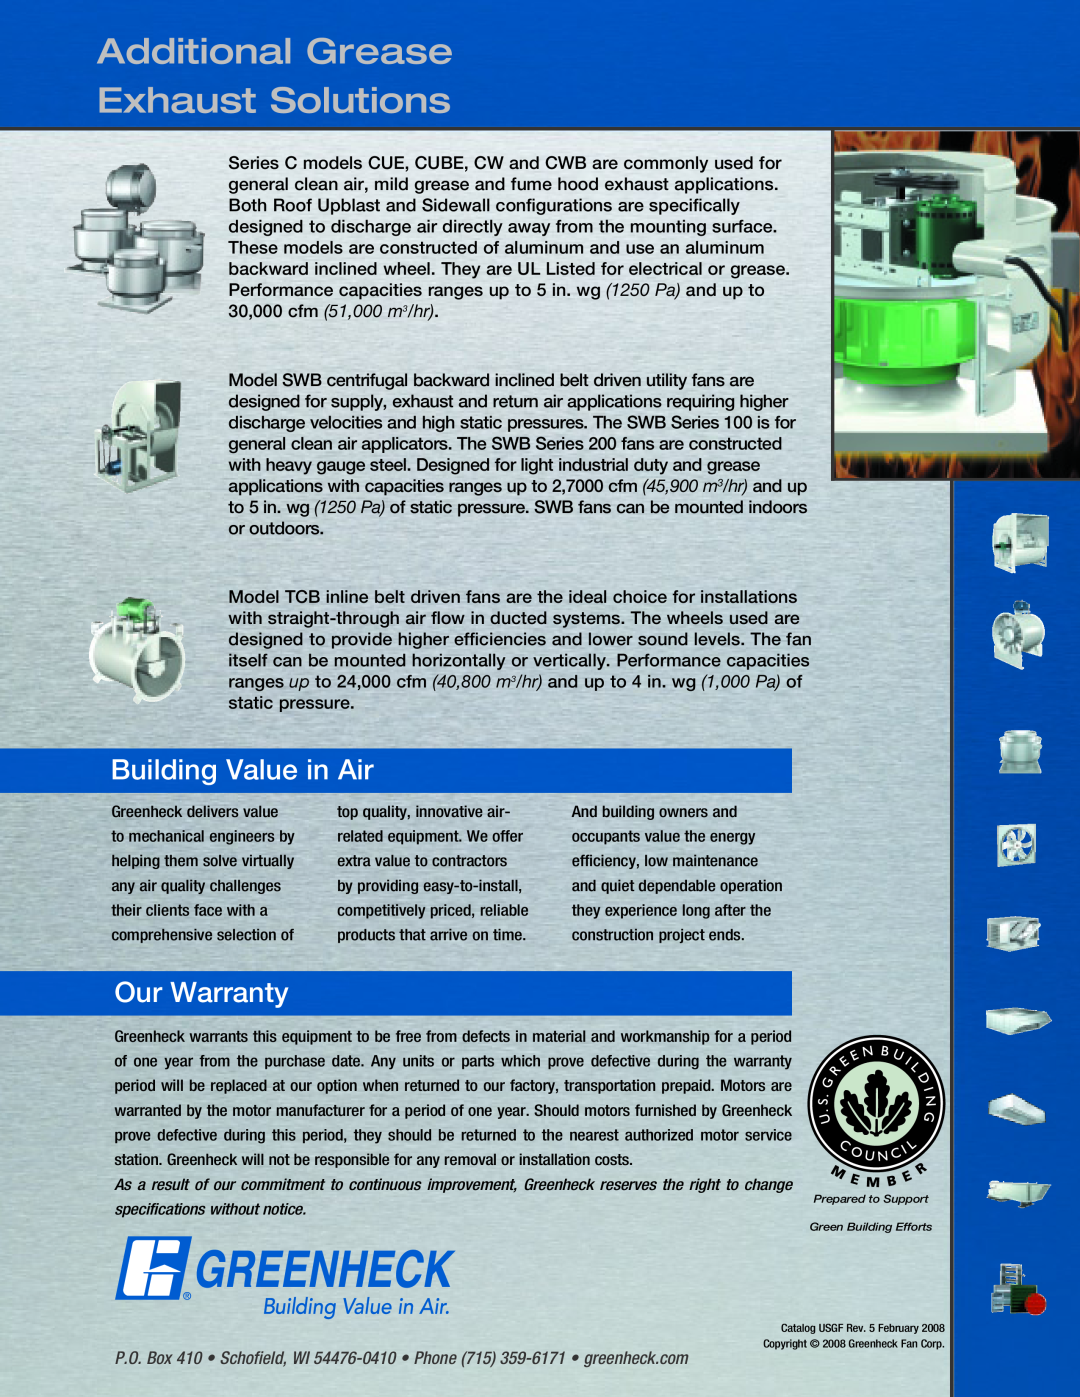 Greenheck Fan USGF manual Additional Grease Exhaust Solutions, Building Value in Air, Our Warranty 